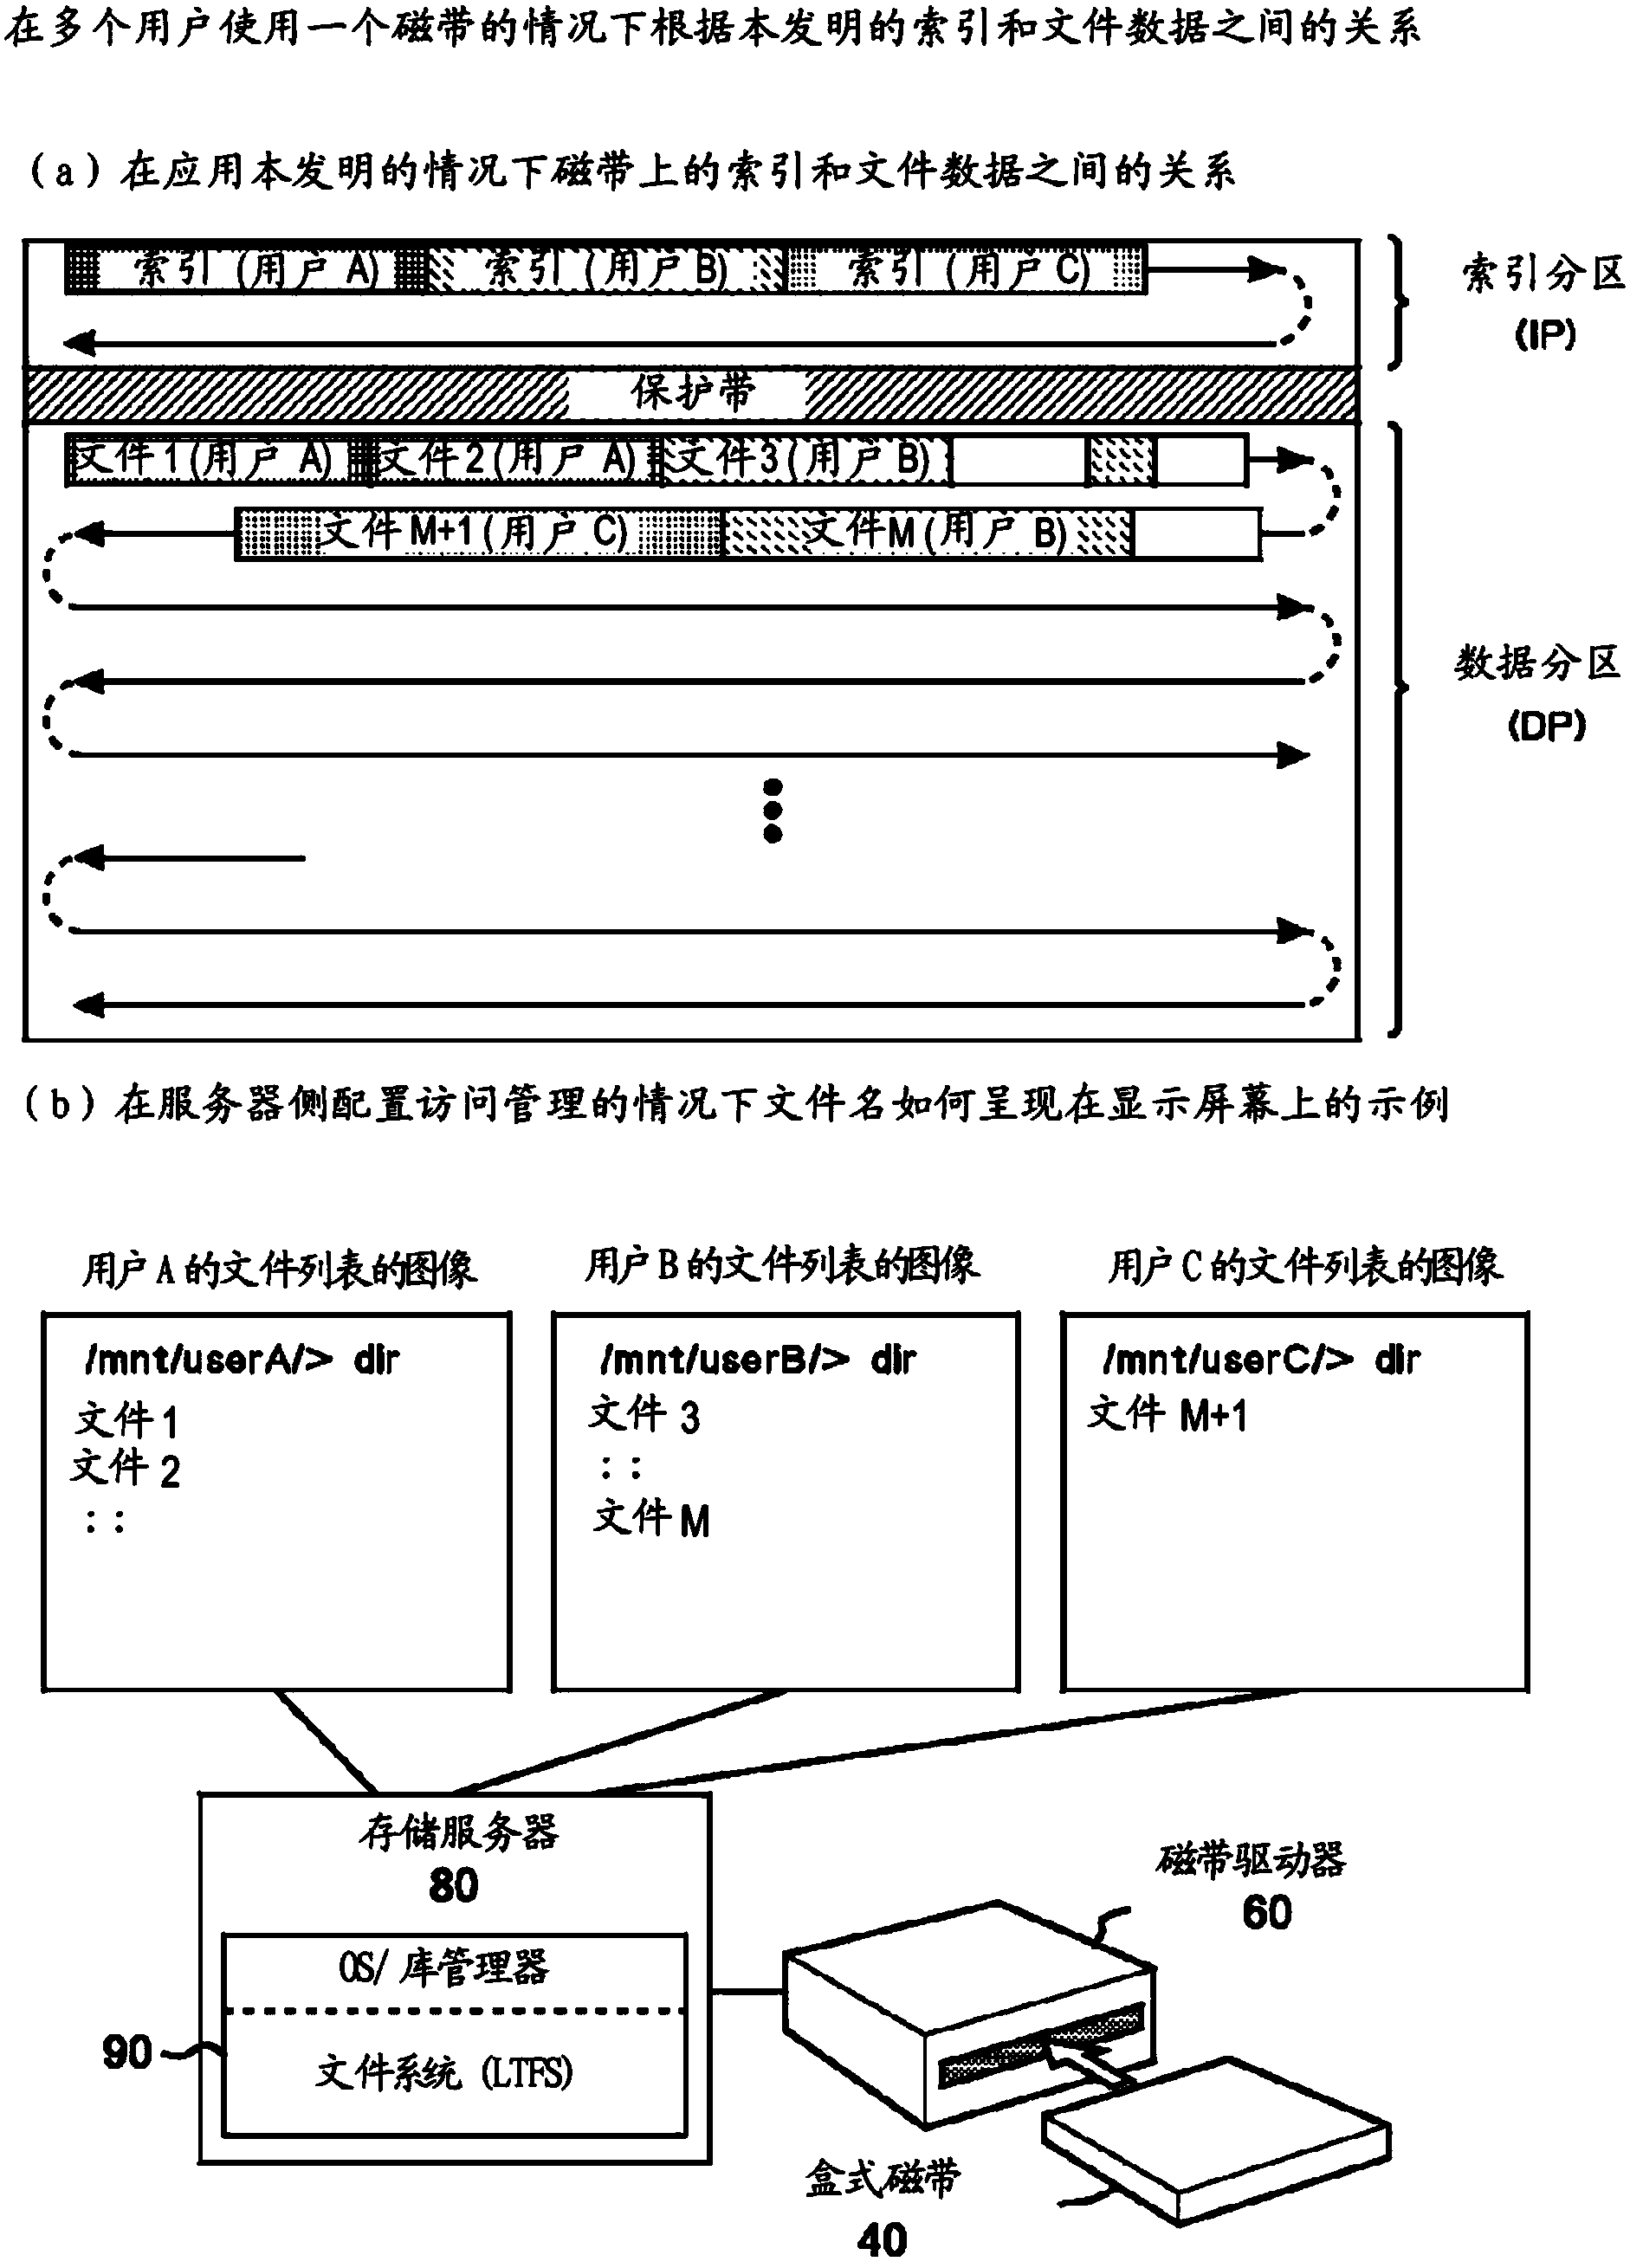 Method for divisionally managing files on a user basis, and a storage system thereof